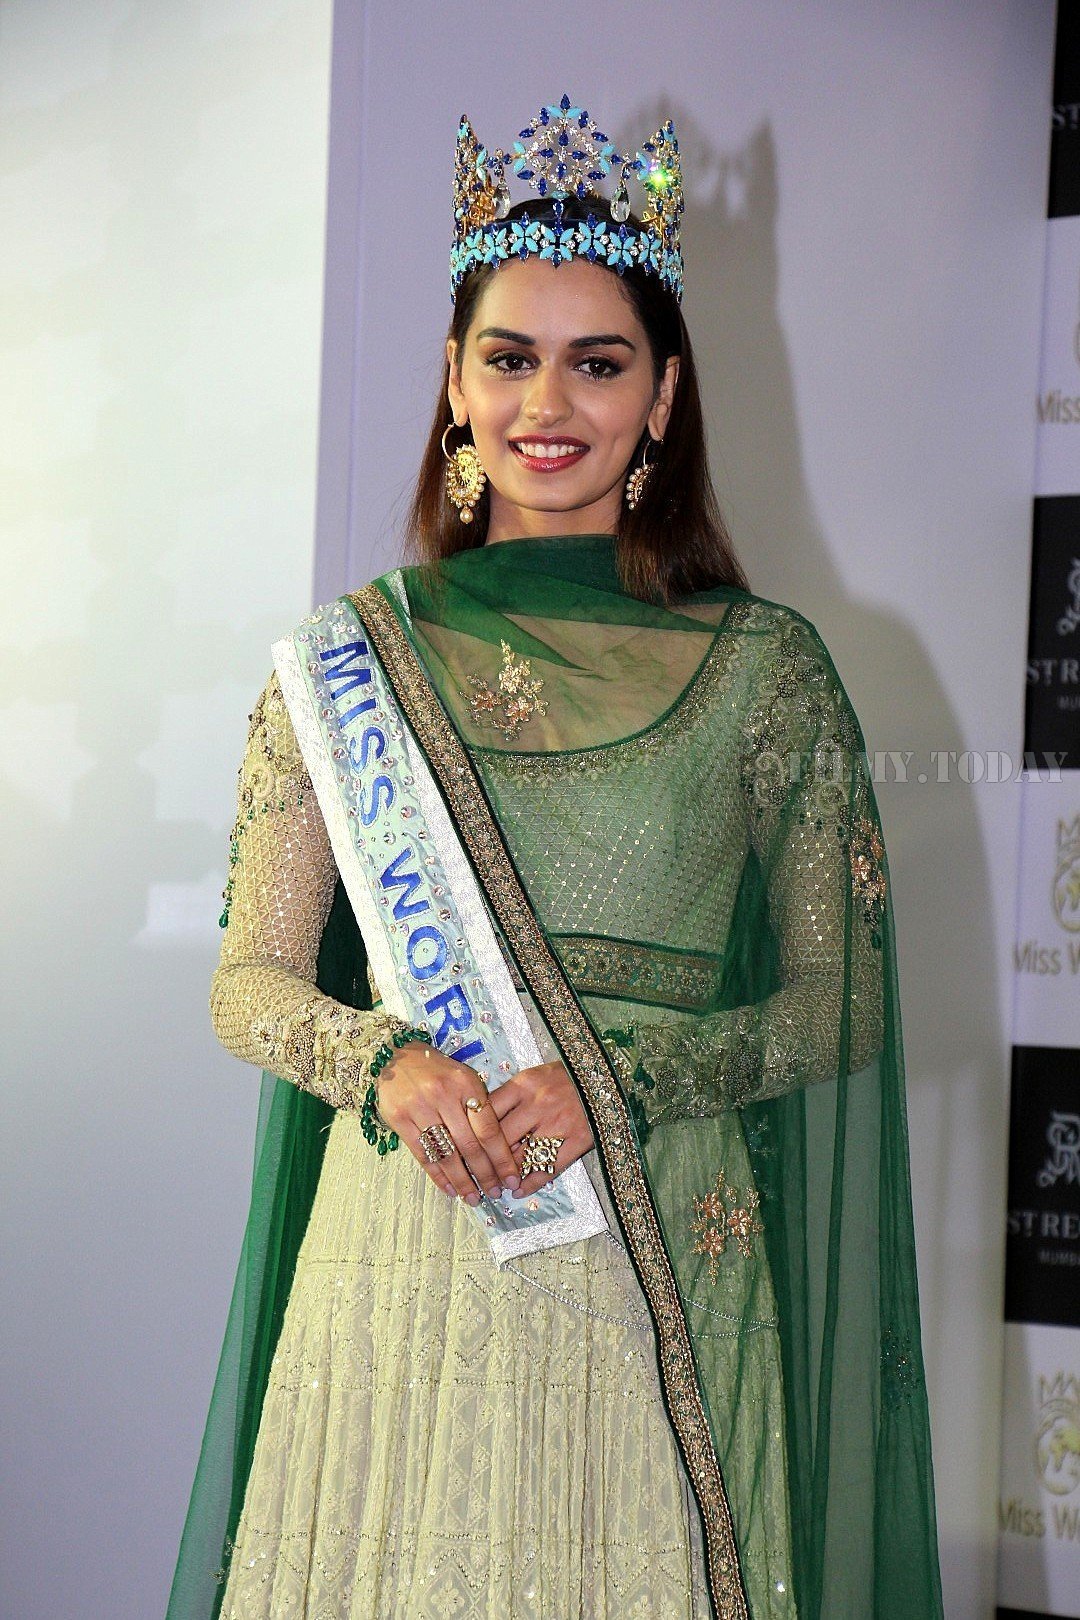 Photos: Manushi Chillar At The Press Conference For Winning Miss World Title | Picture 1547412